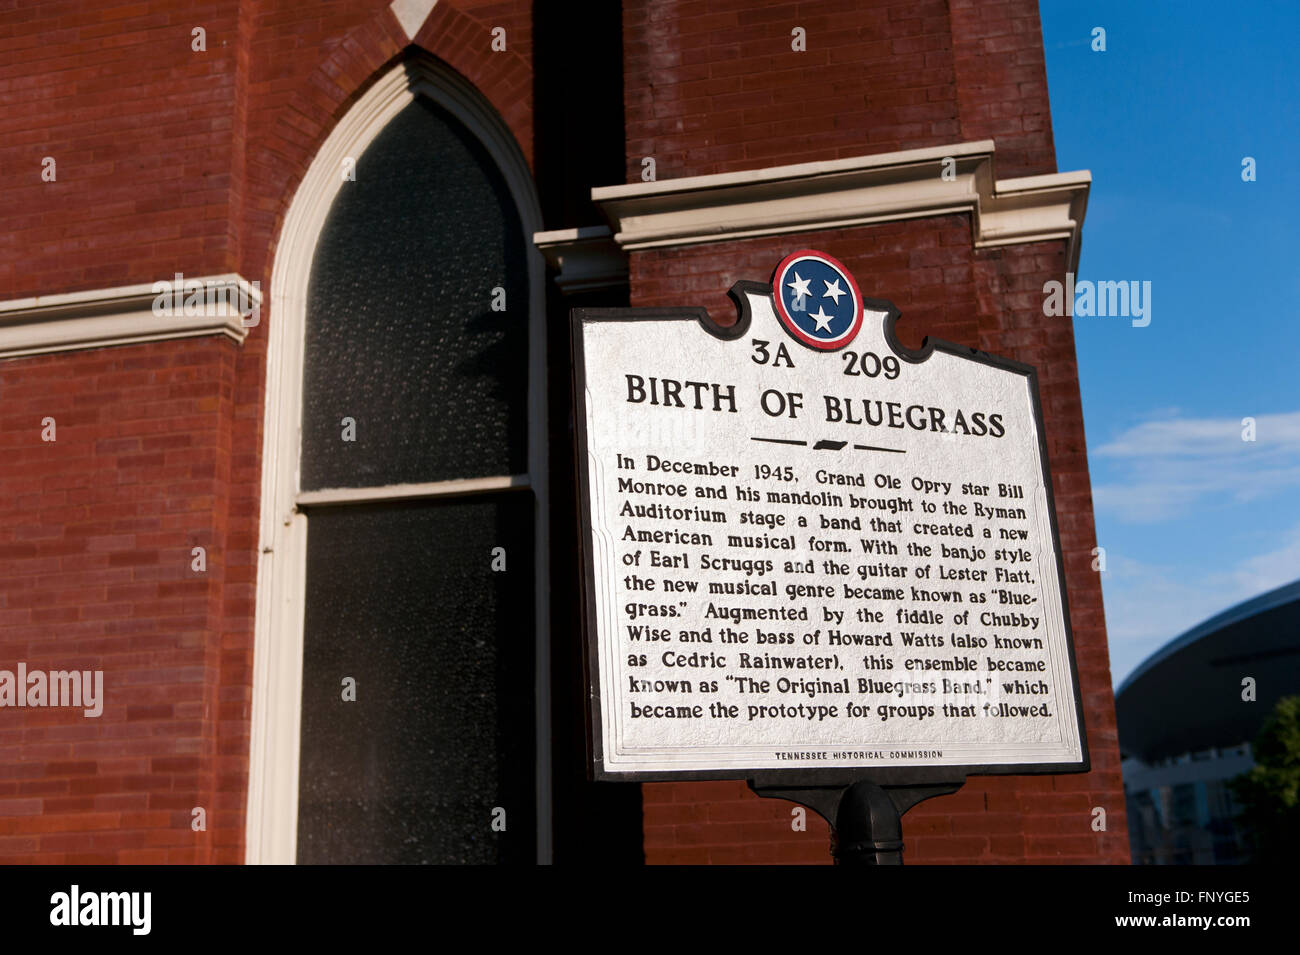 A plaque in front of The Ryman Auditorium in Nashville, Tennessee commemorating it as the 'Home of Bluegrass' music Stock Photo